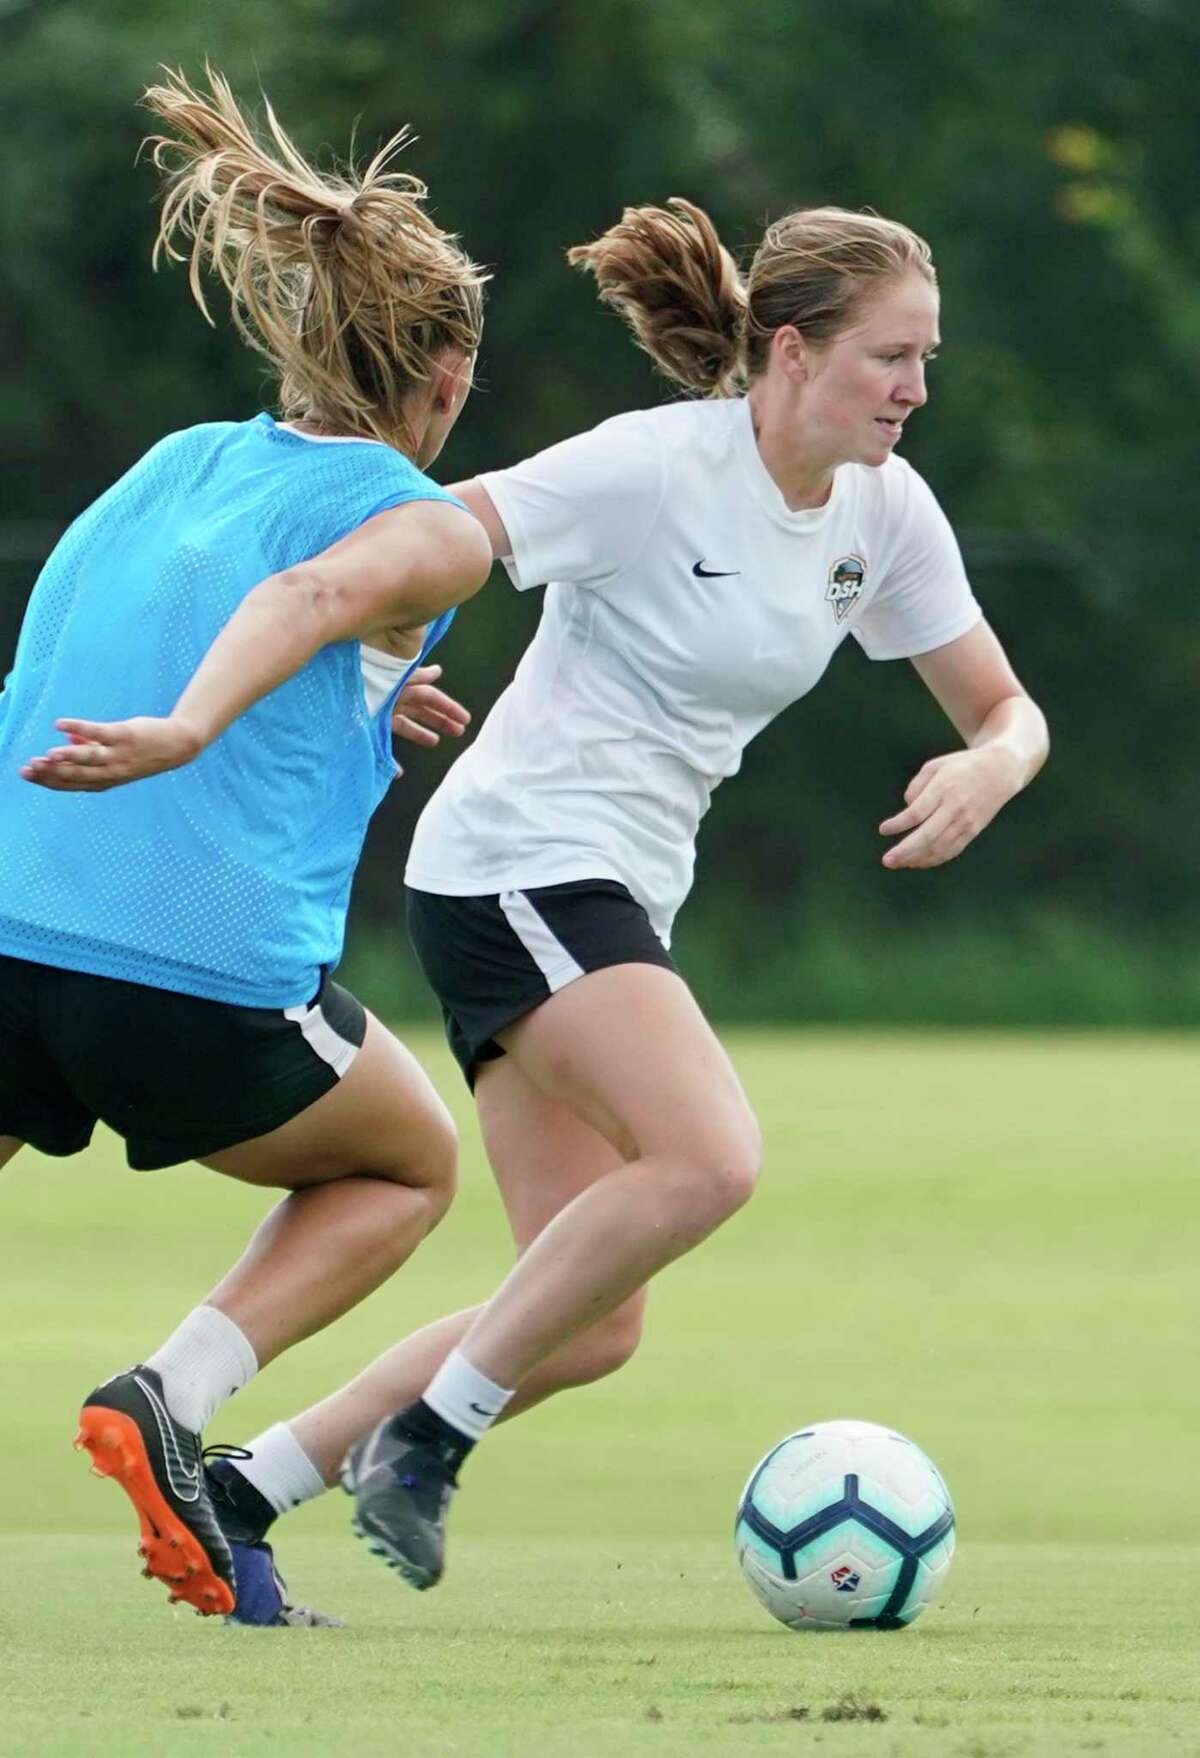 Dash academy’s Kate Colvin, 17, practiced with the squad while some members were competing in the Women’s World Cup.